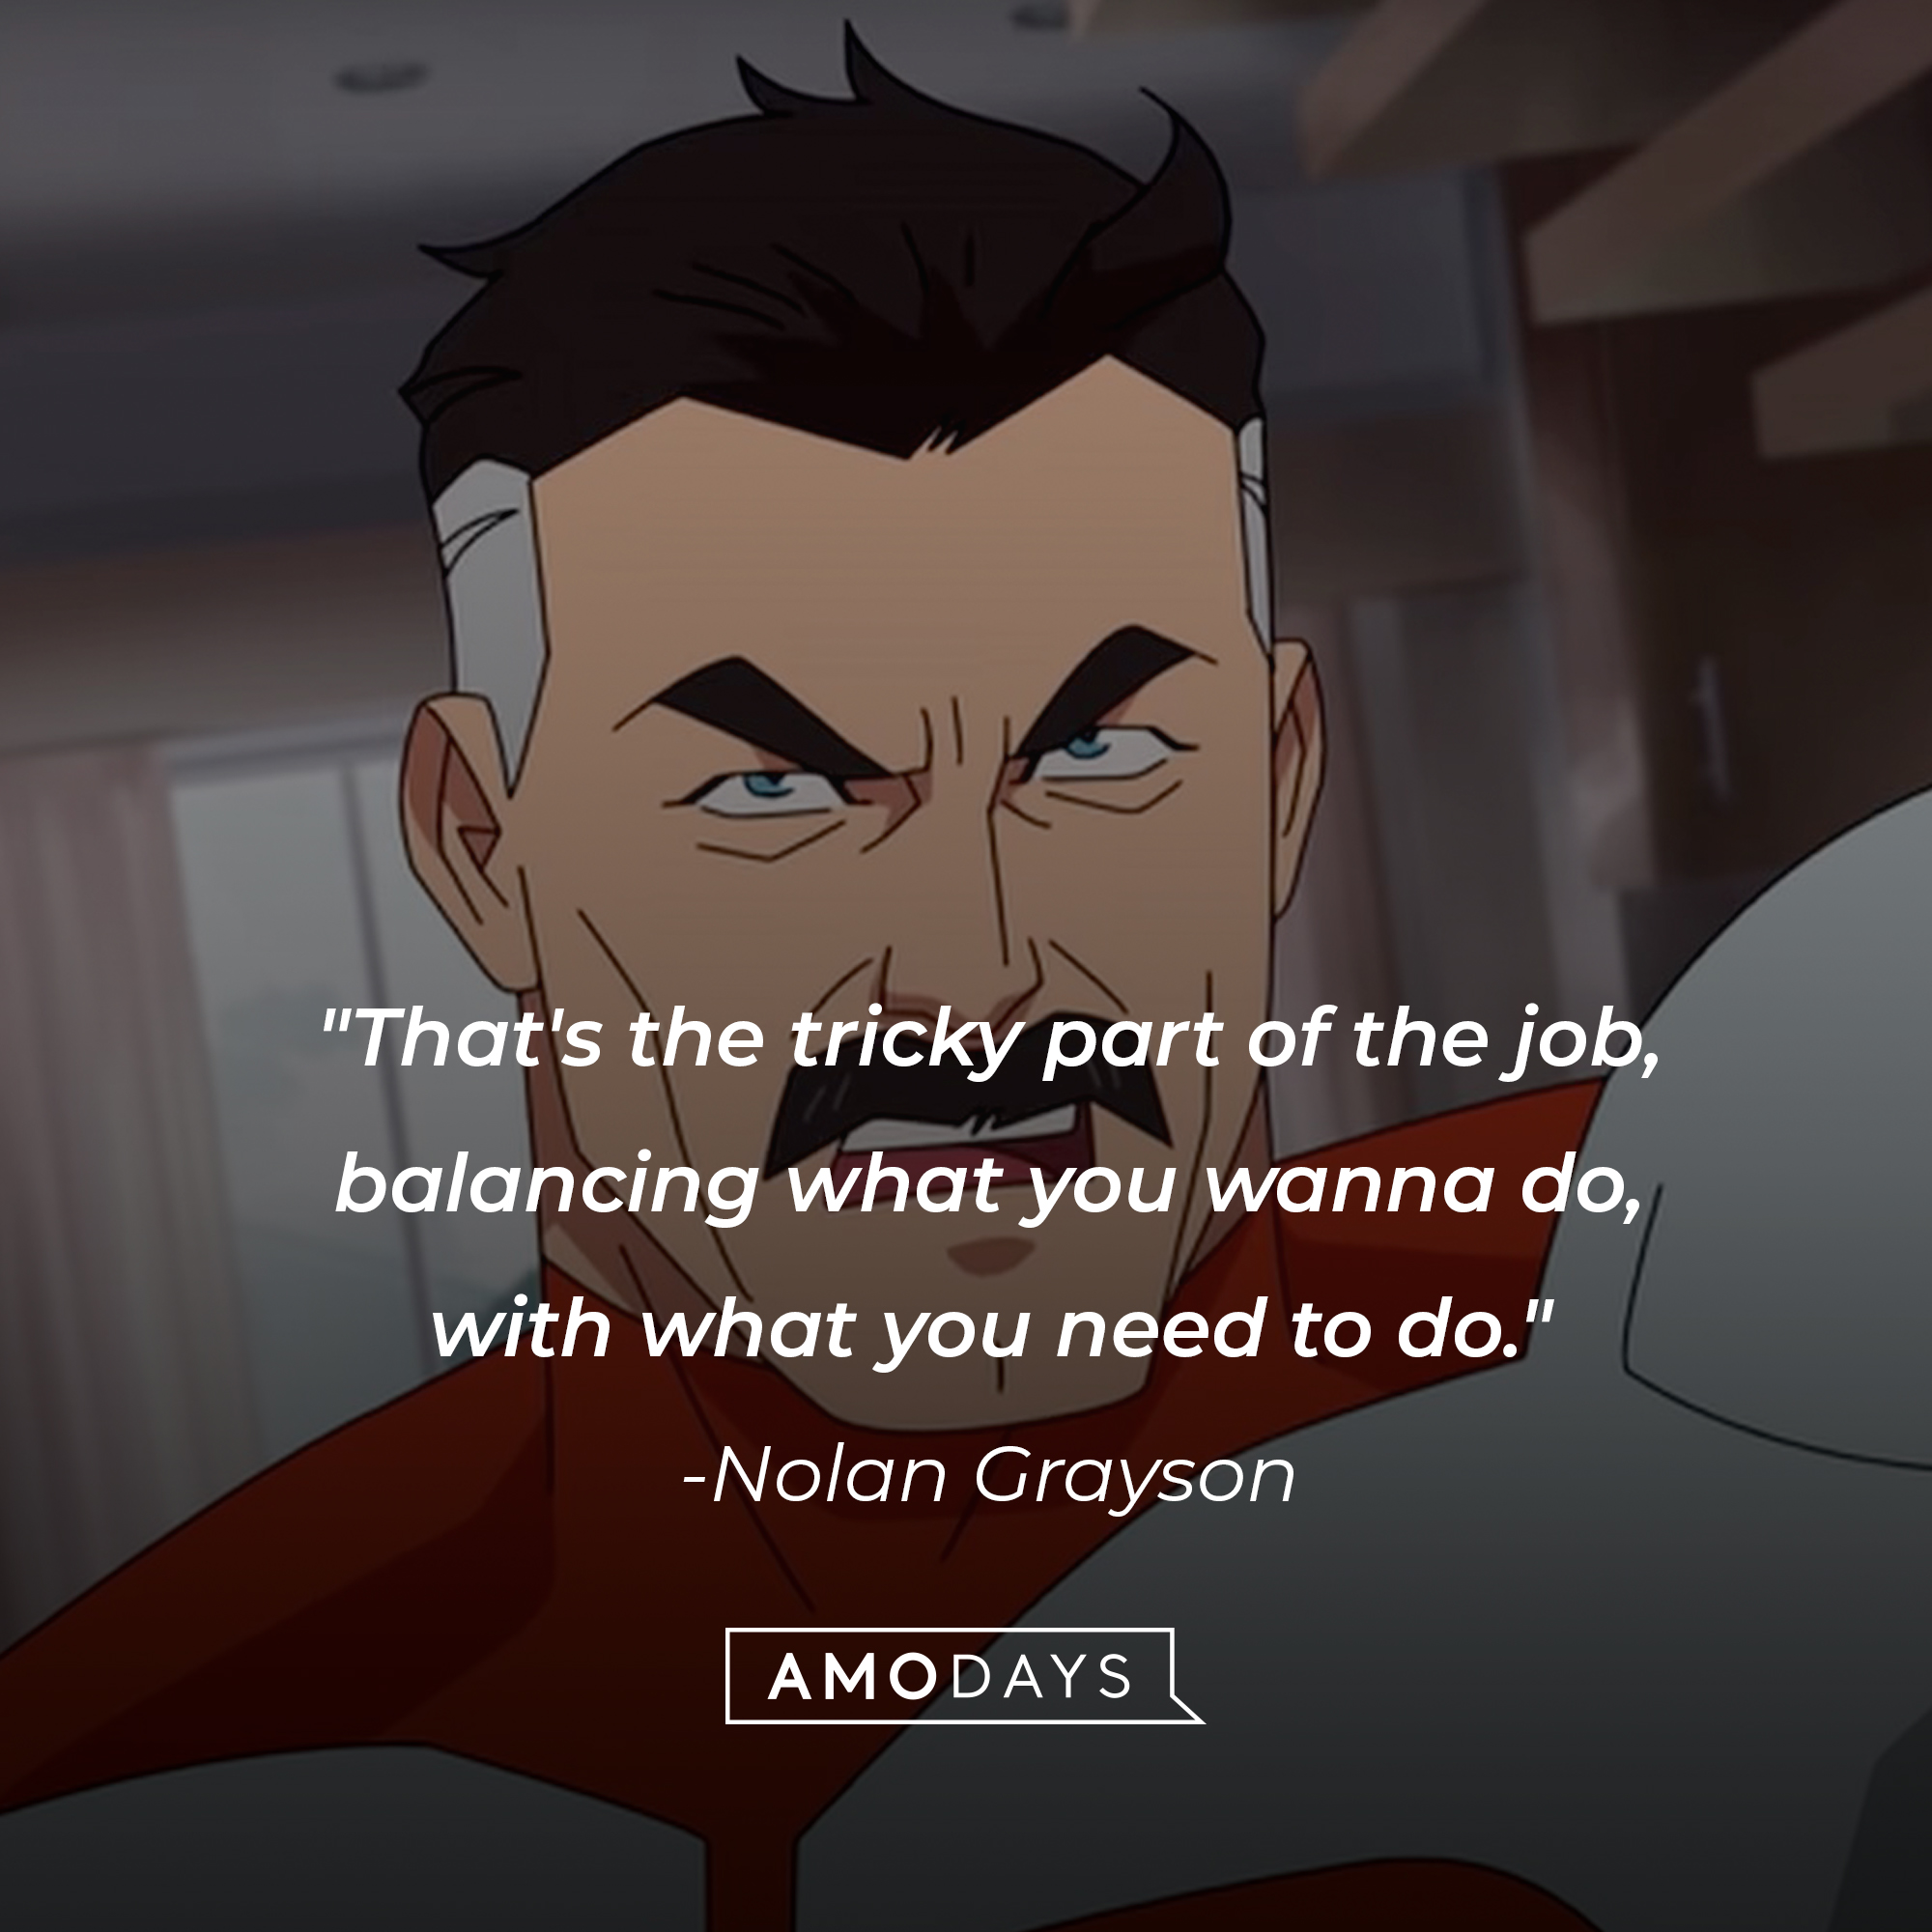 Nolan Grayson's quote: "That's the tricky part of the job, balancing what you wanna do, with what you need to do." | Source: Facebook.com/Invincibleuniverse